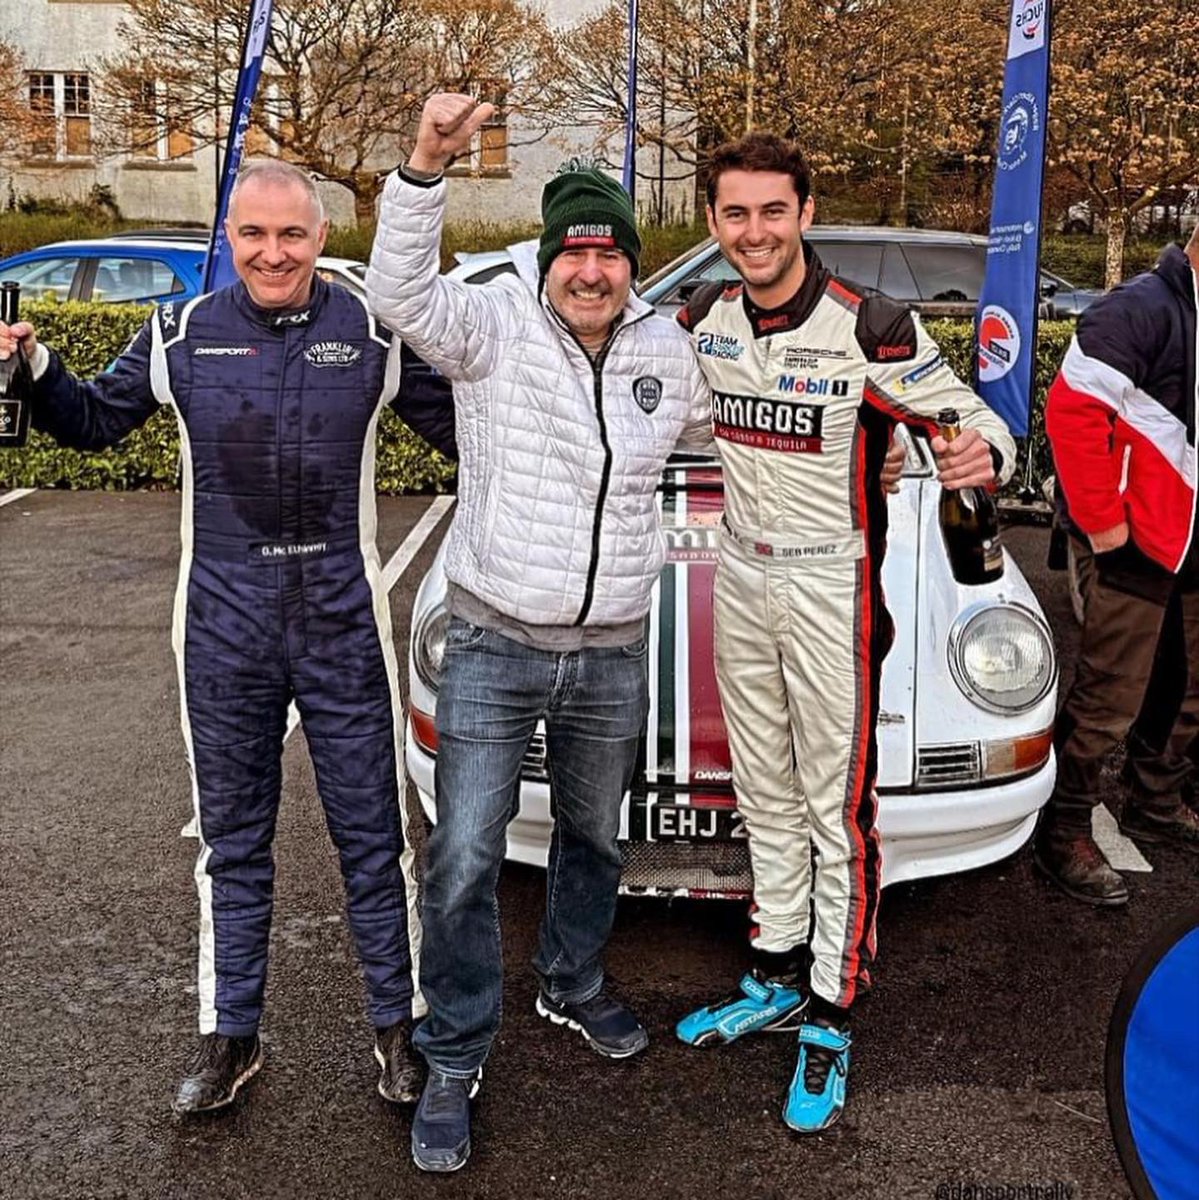 Overall winners in Wales of the @RallynutsStages Historic Rally with @SebPerez77 Great battle all day and cool to have 2 famous rally legends and sometimes stunt drivers @Mhigginsrally and Adrian Hetherington on the The British Historic Rally Championship podium.@StevenJGPerez